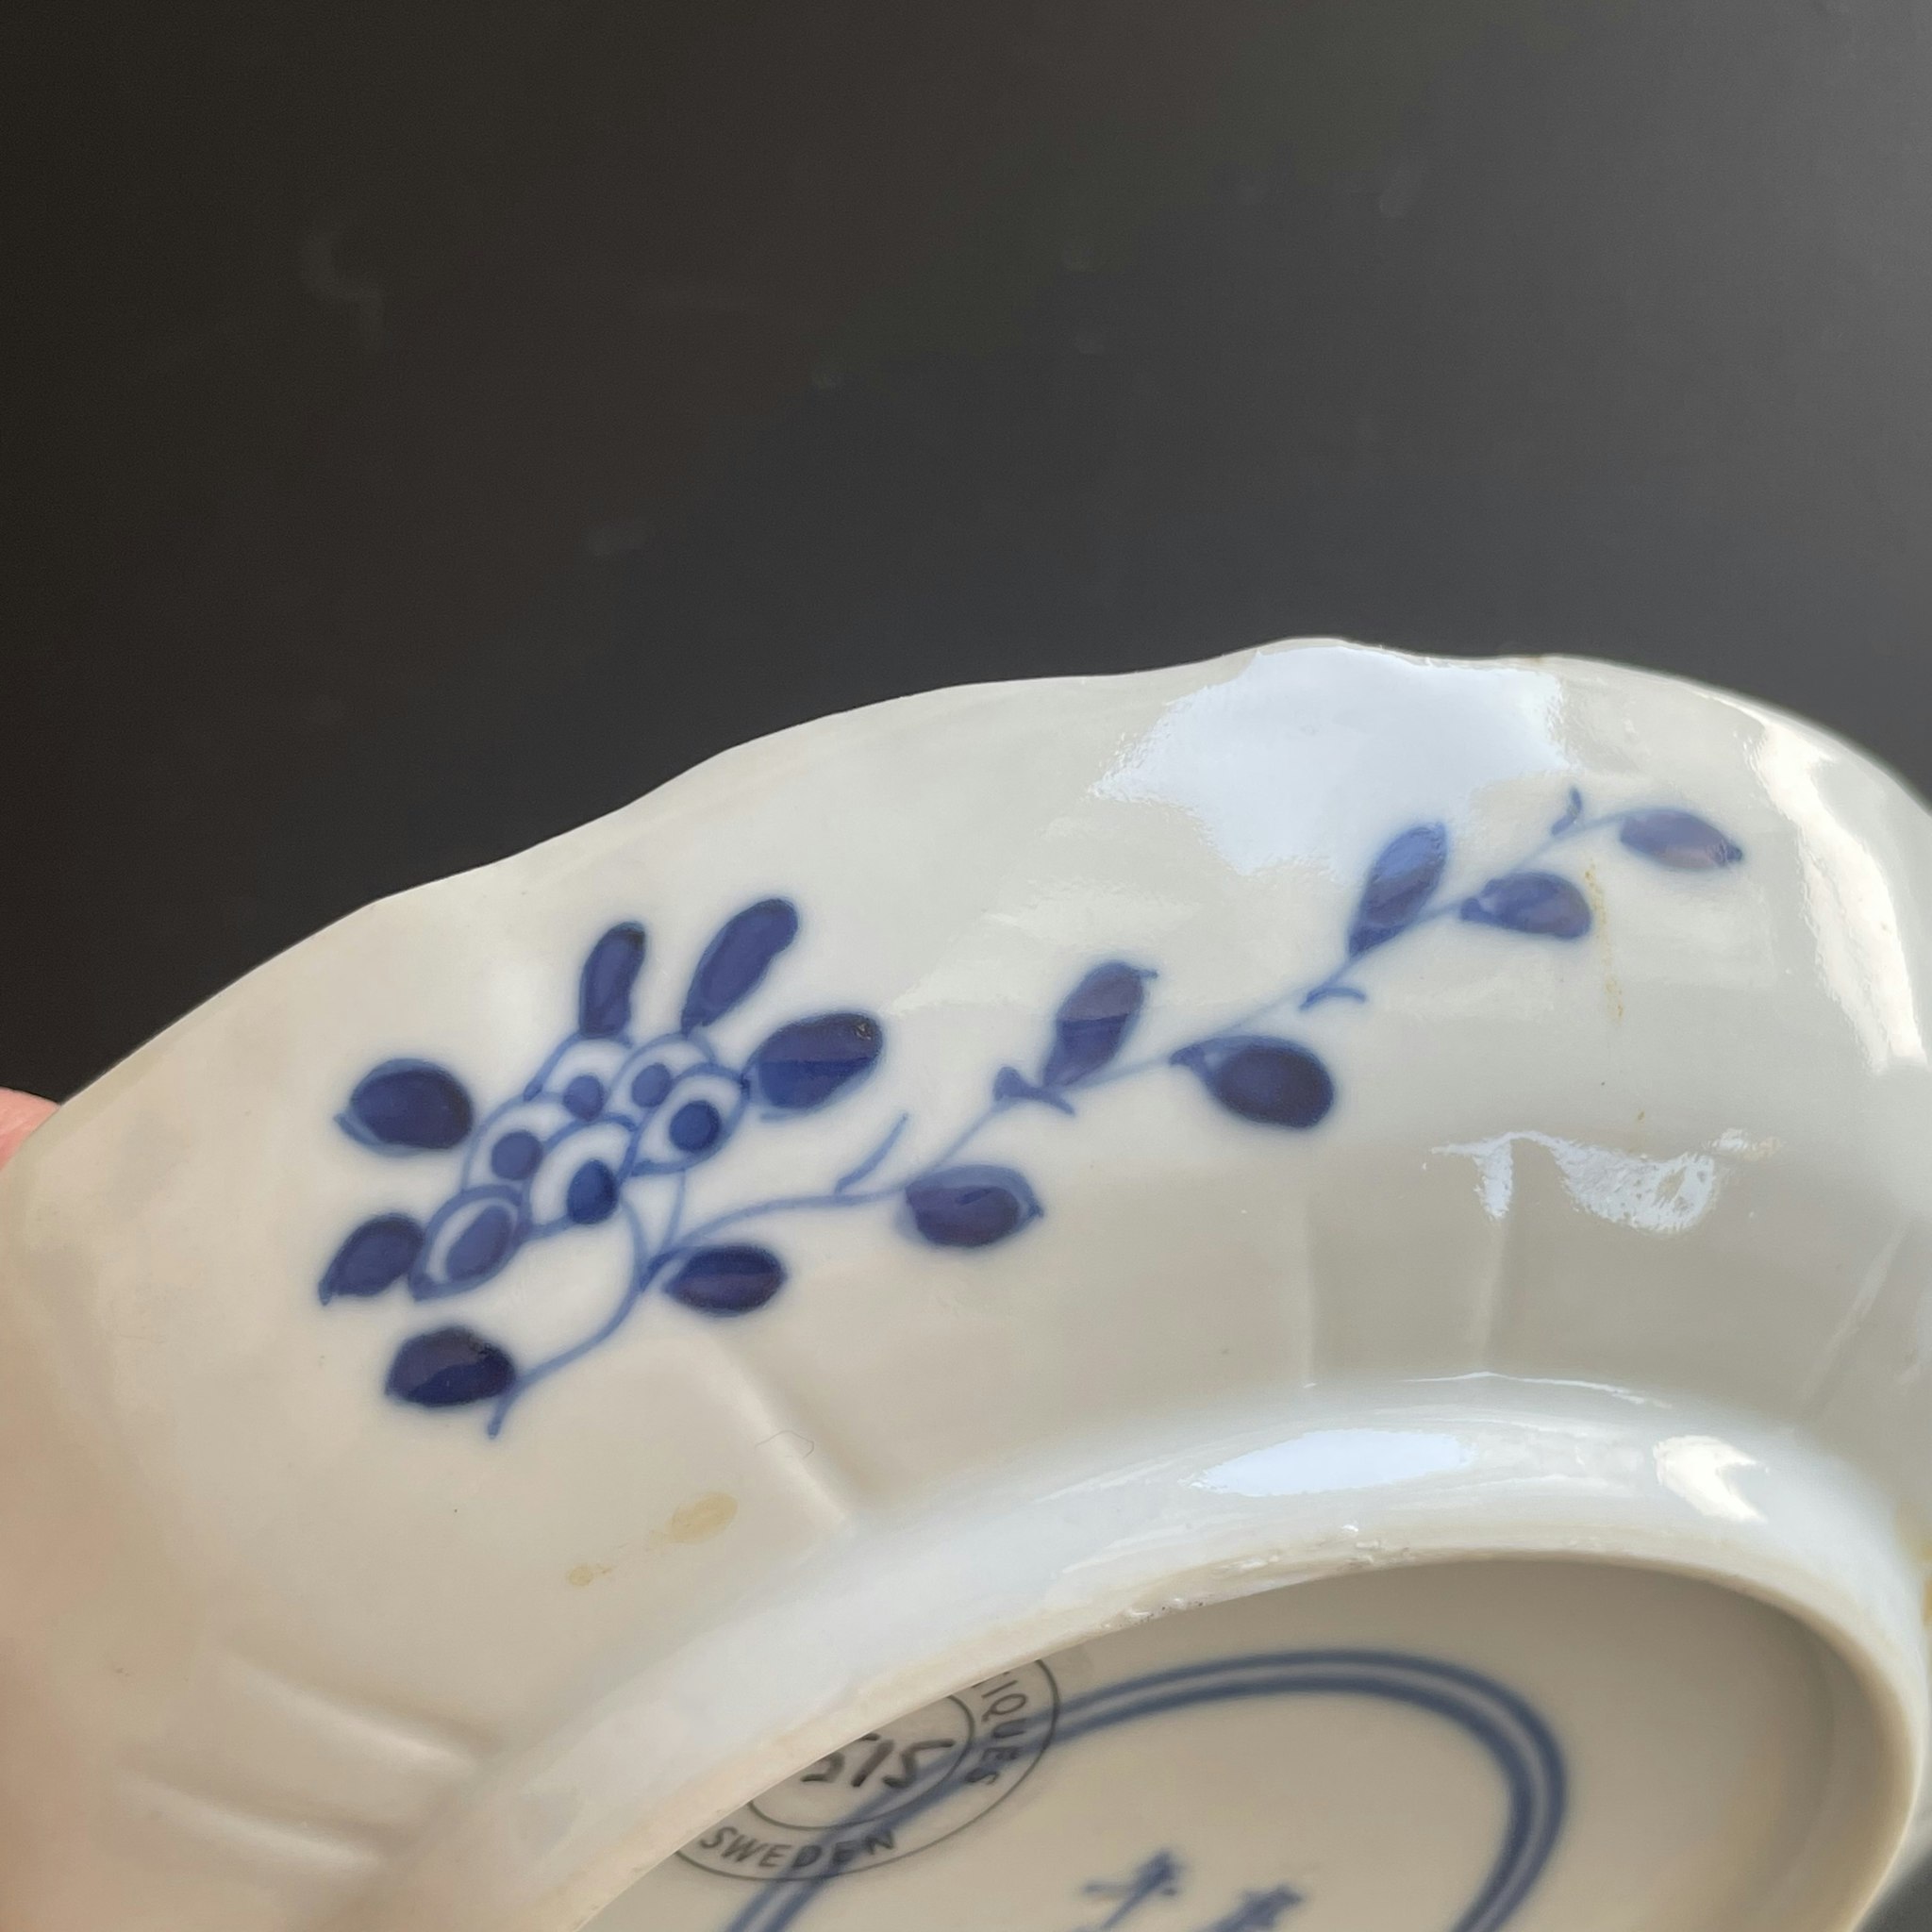 Chinese Antique Teacup & Saucer in blue and white, Late Qing Dynasty #1515